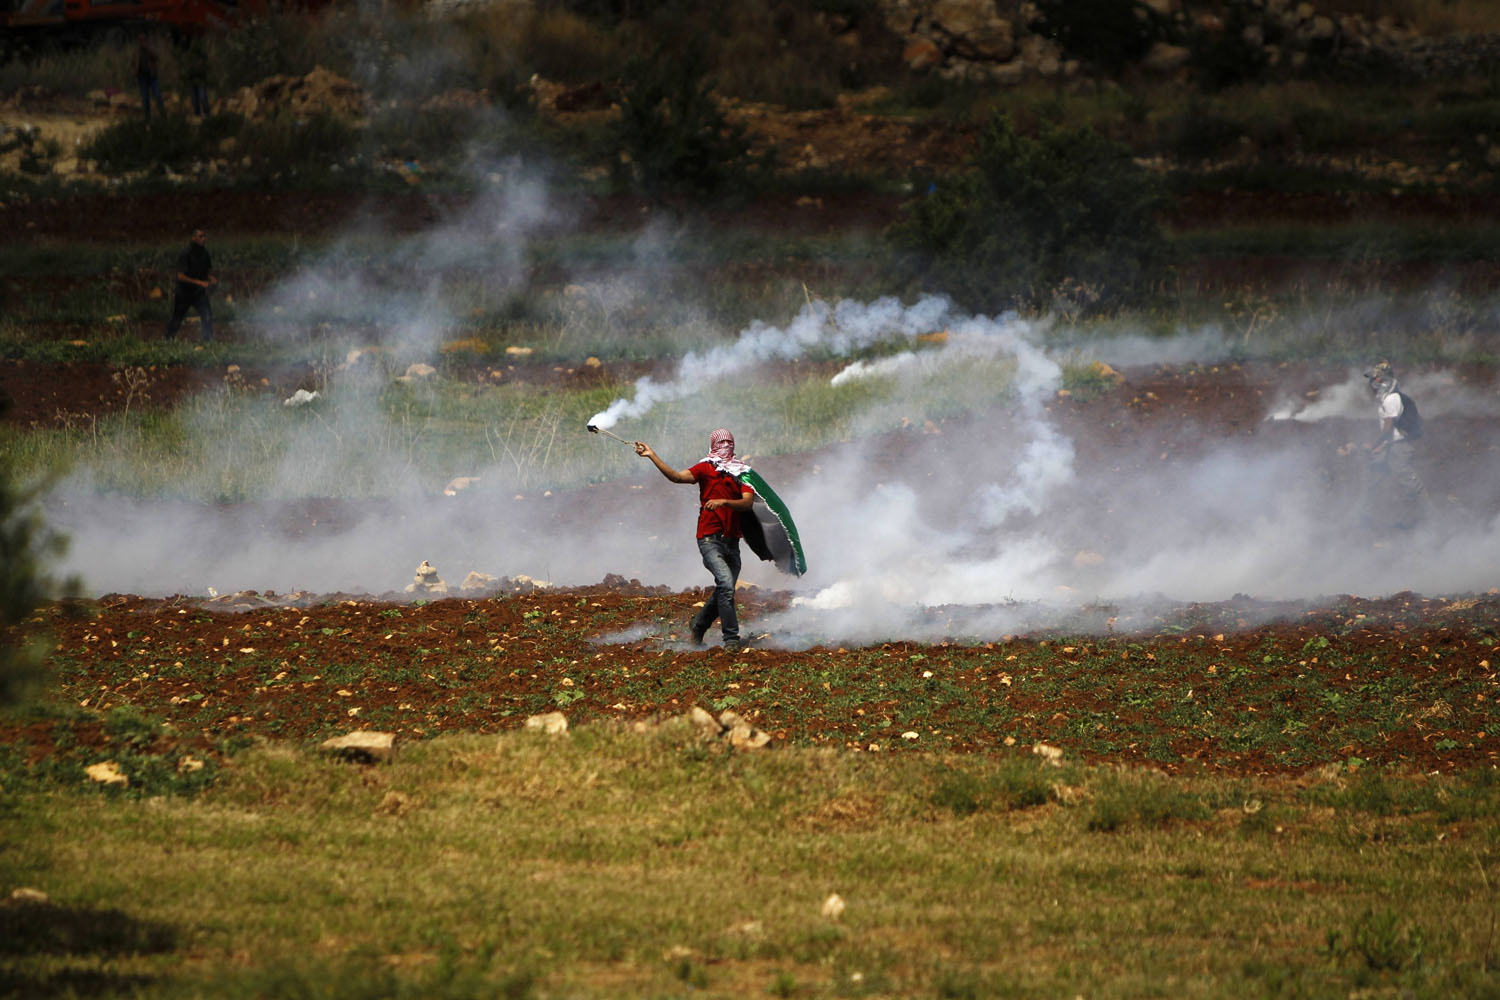 A Palestinian demonstrator returns a tear gas canister towards Israeli  security forces during clashes to mark Nakba Day near the West Bank city of Ramallah